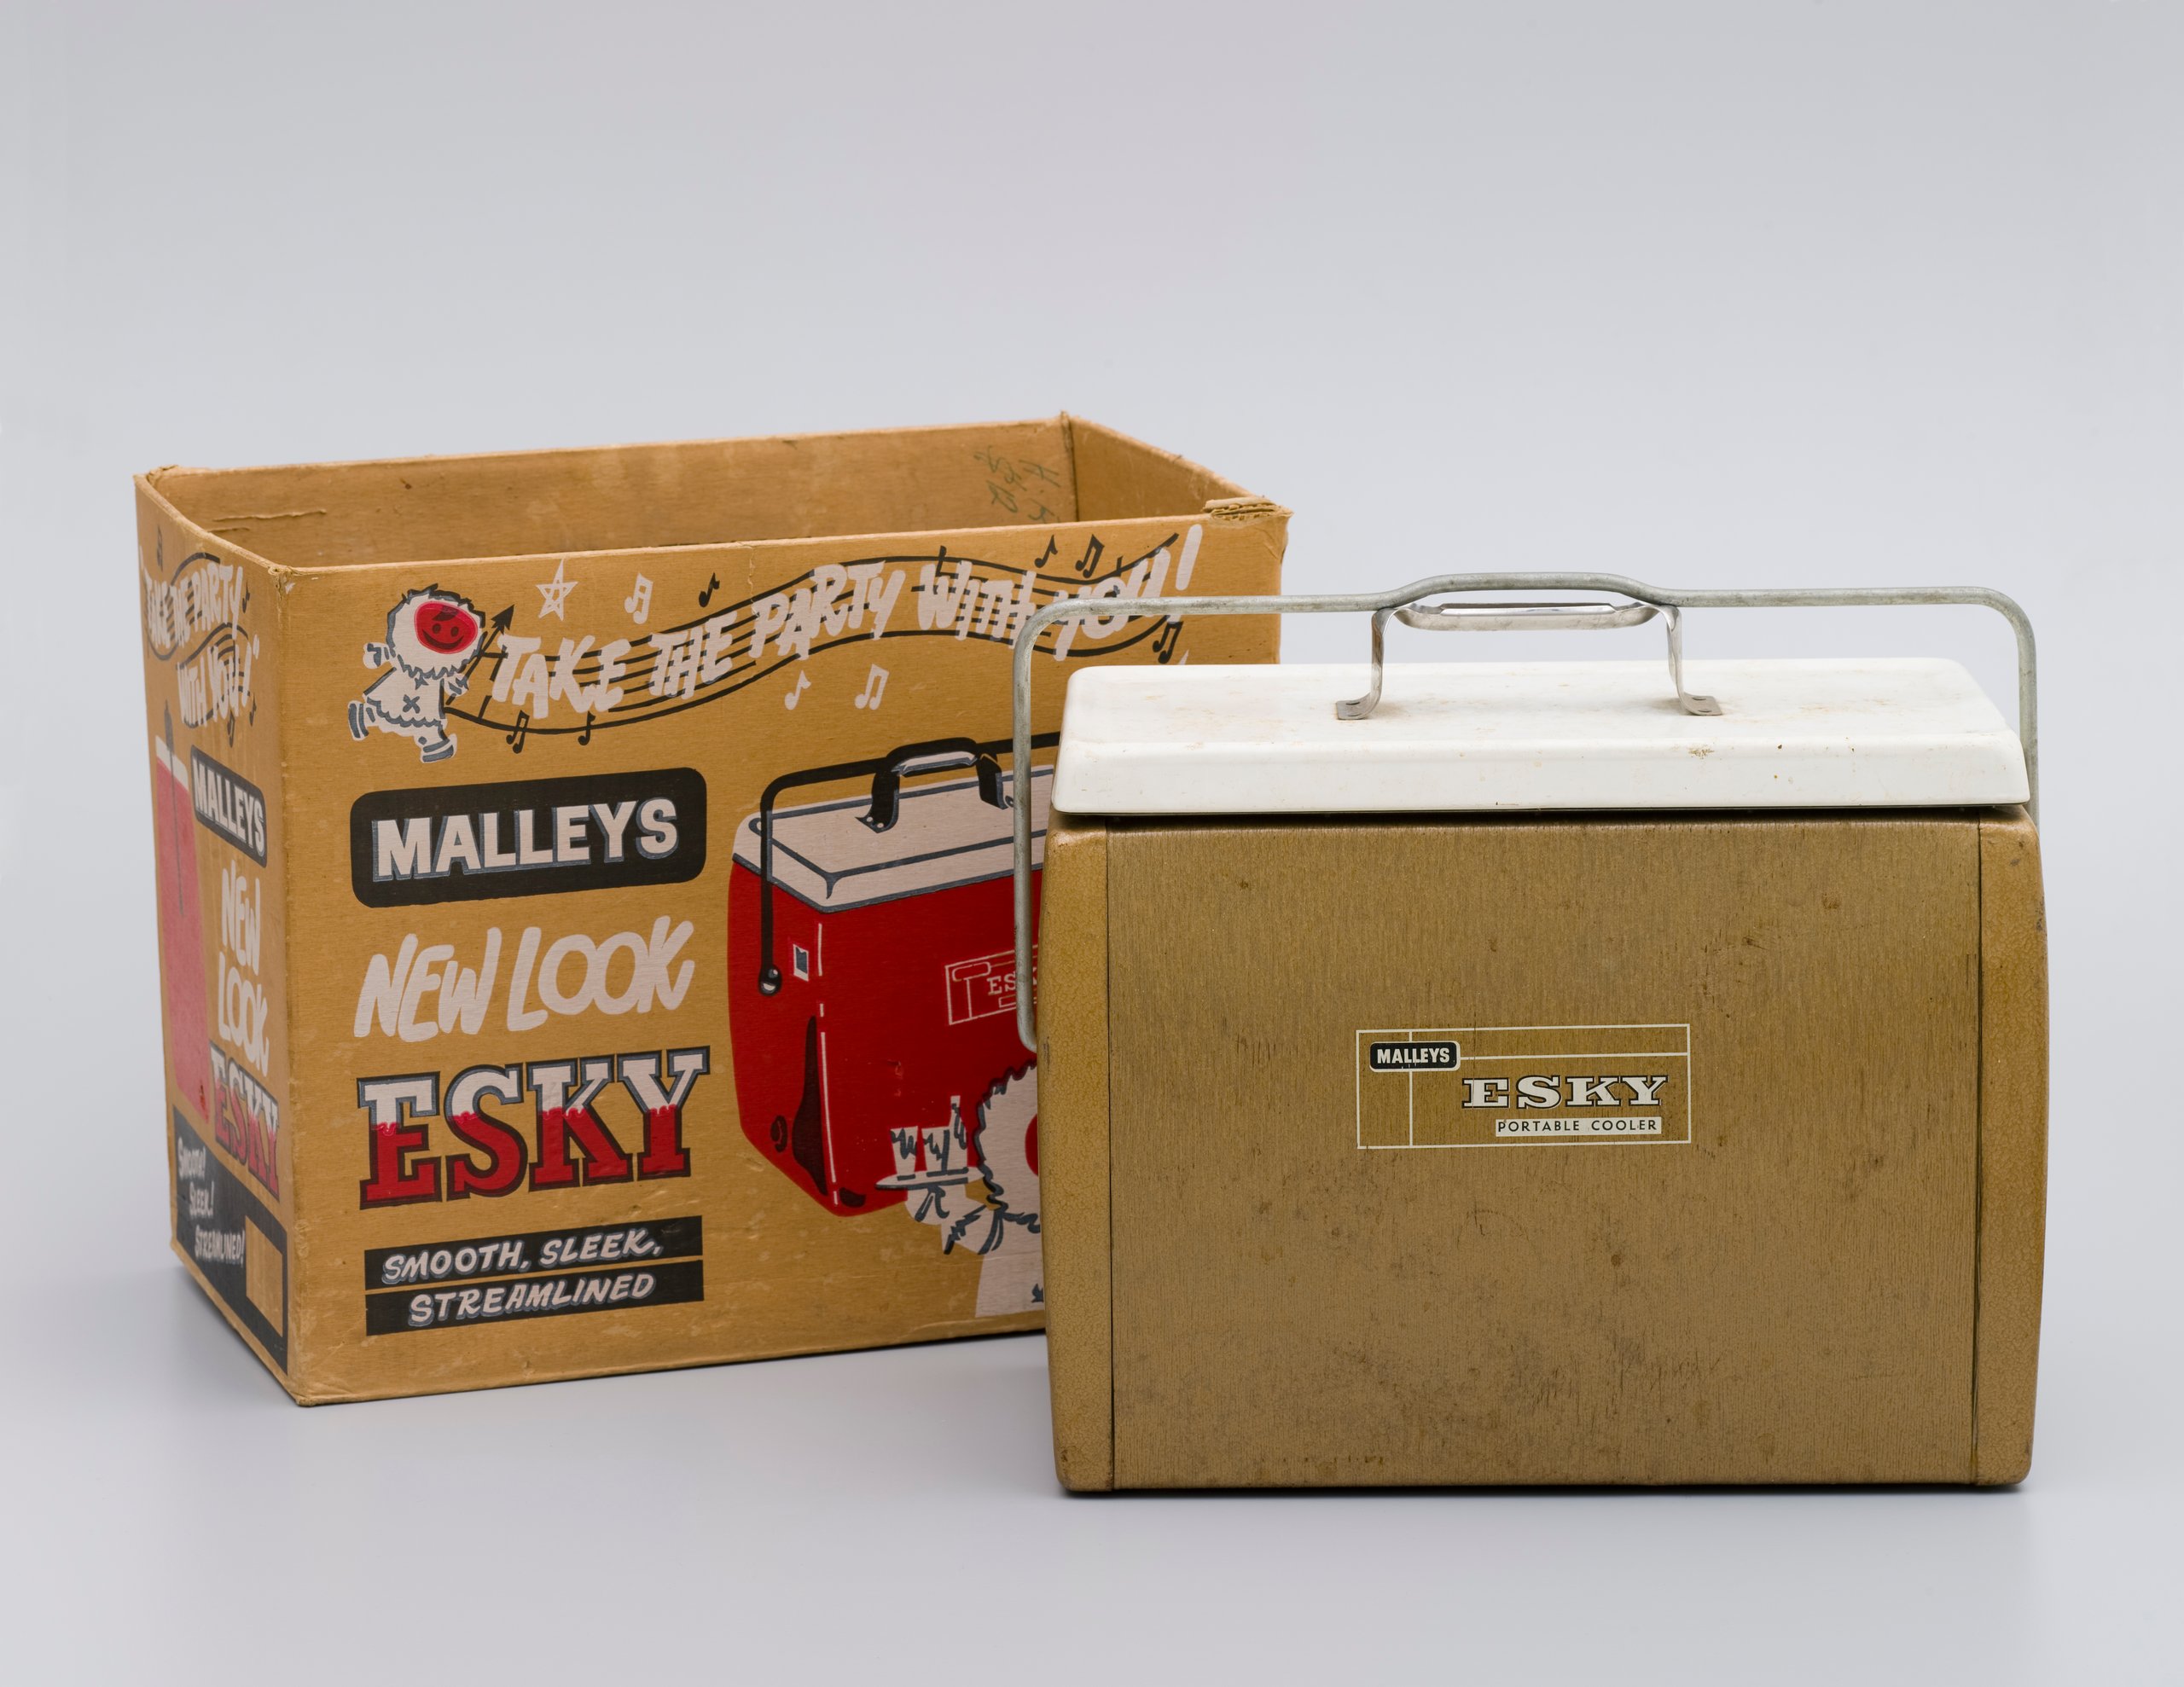 Esky by Malley's